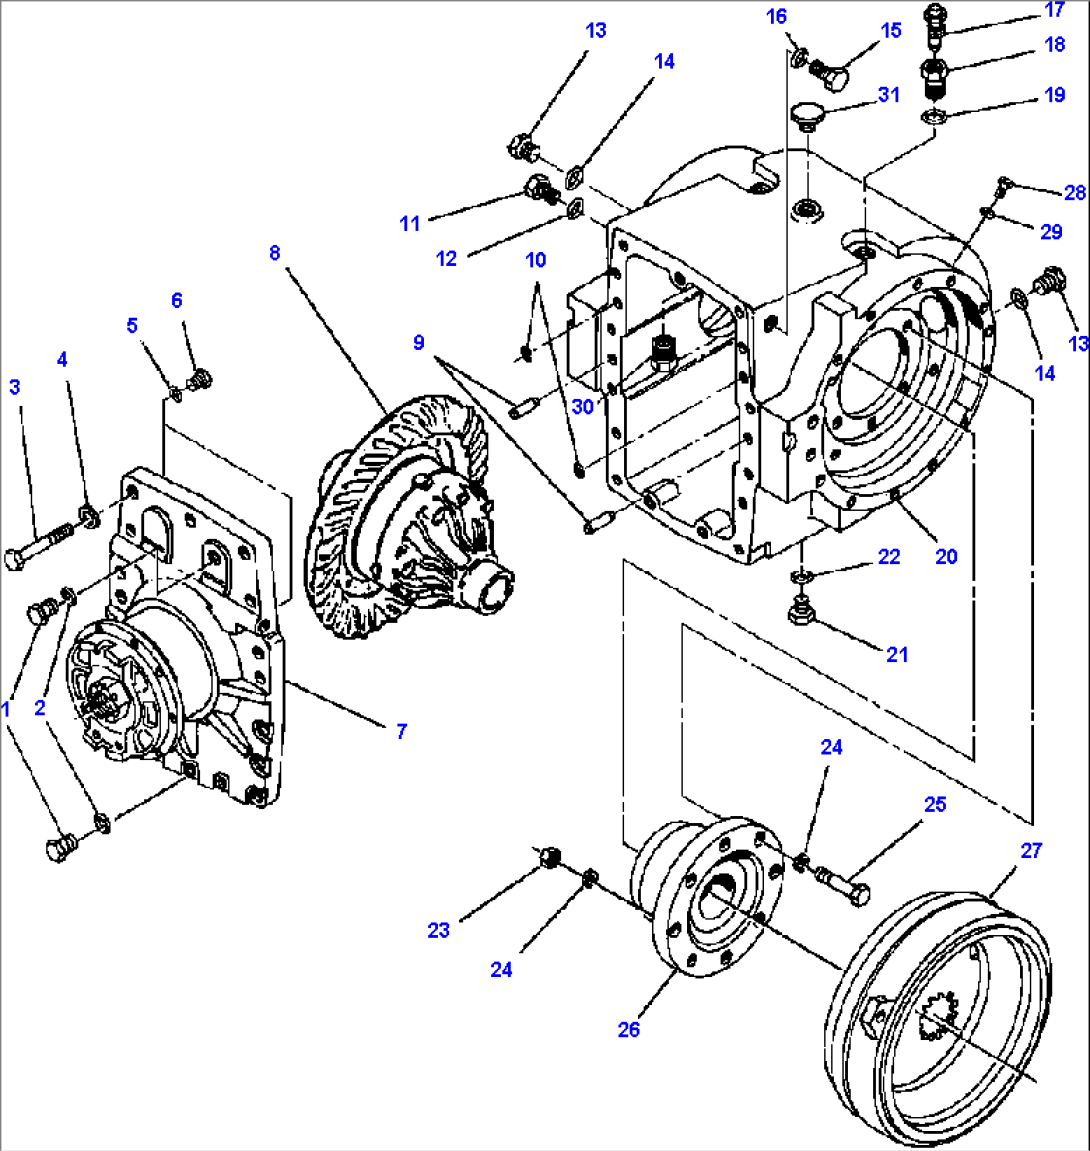 NoSPIN DIFFERENTIAL CASE ASSEMBLY